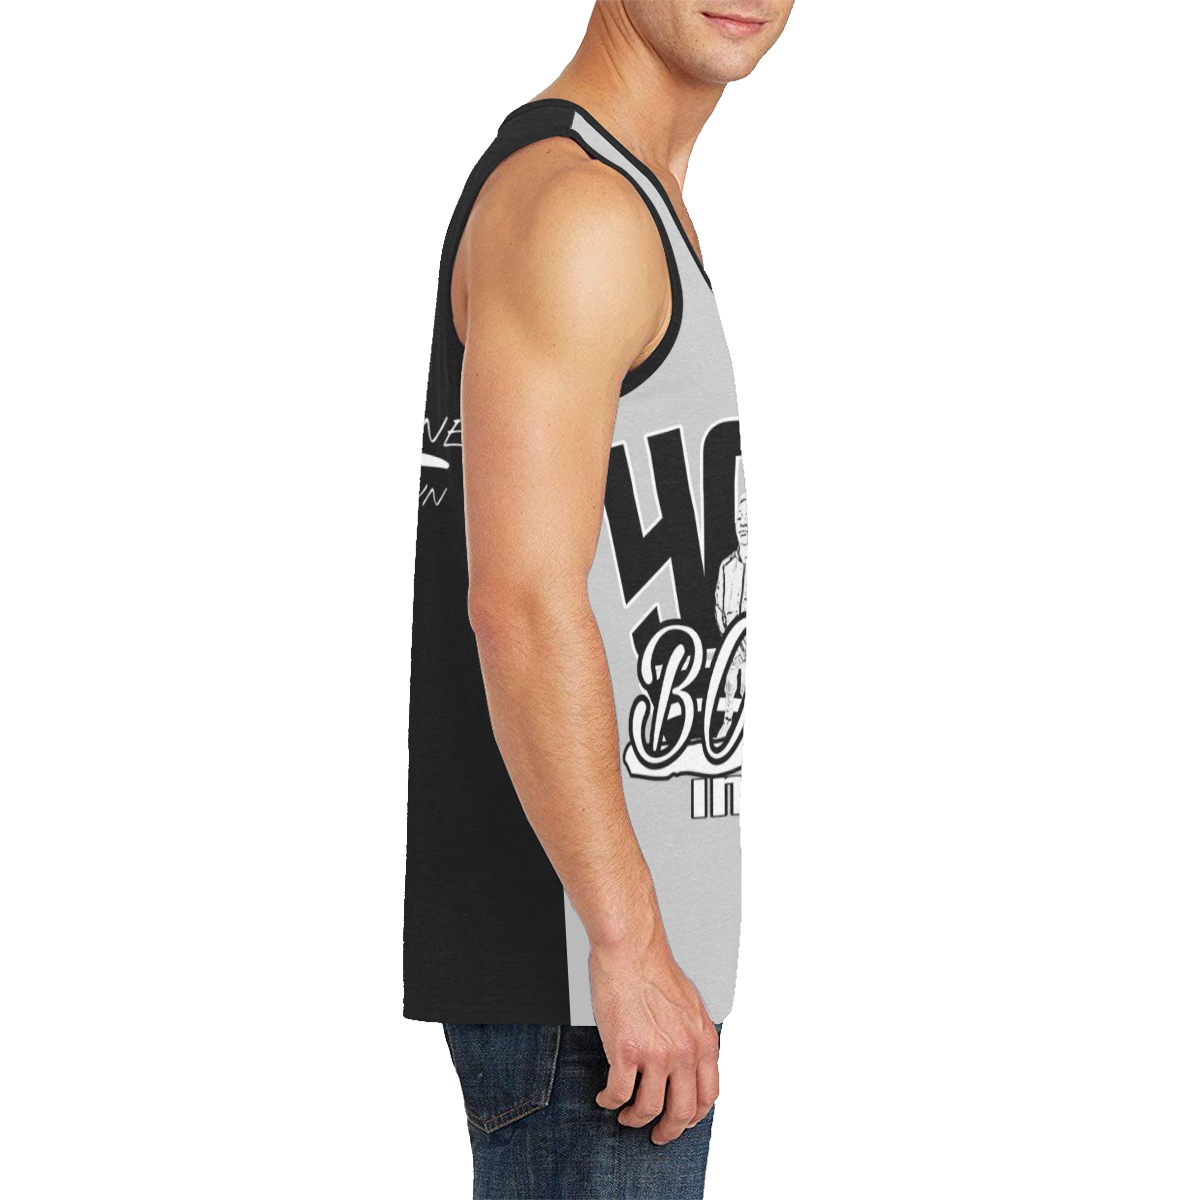 YahBoy Inc Gray Men's All Over Print Tank Top (Model T57)